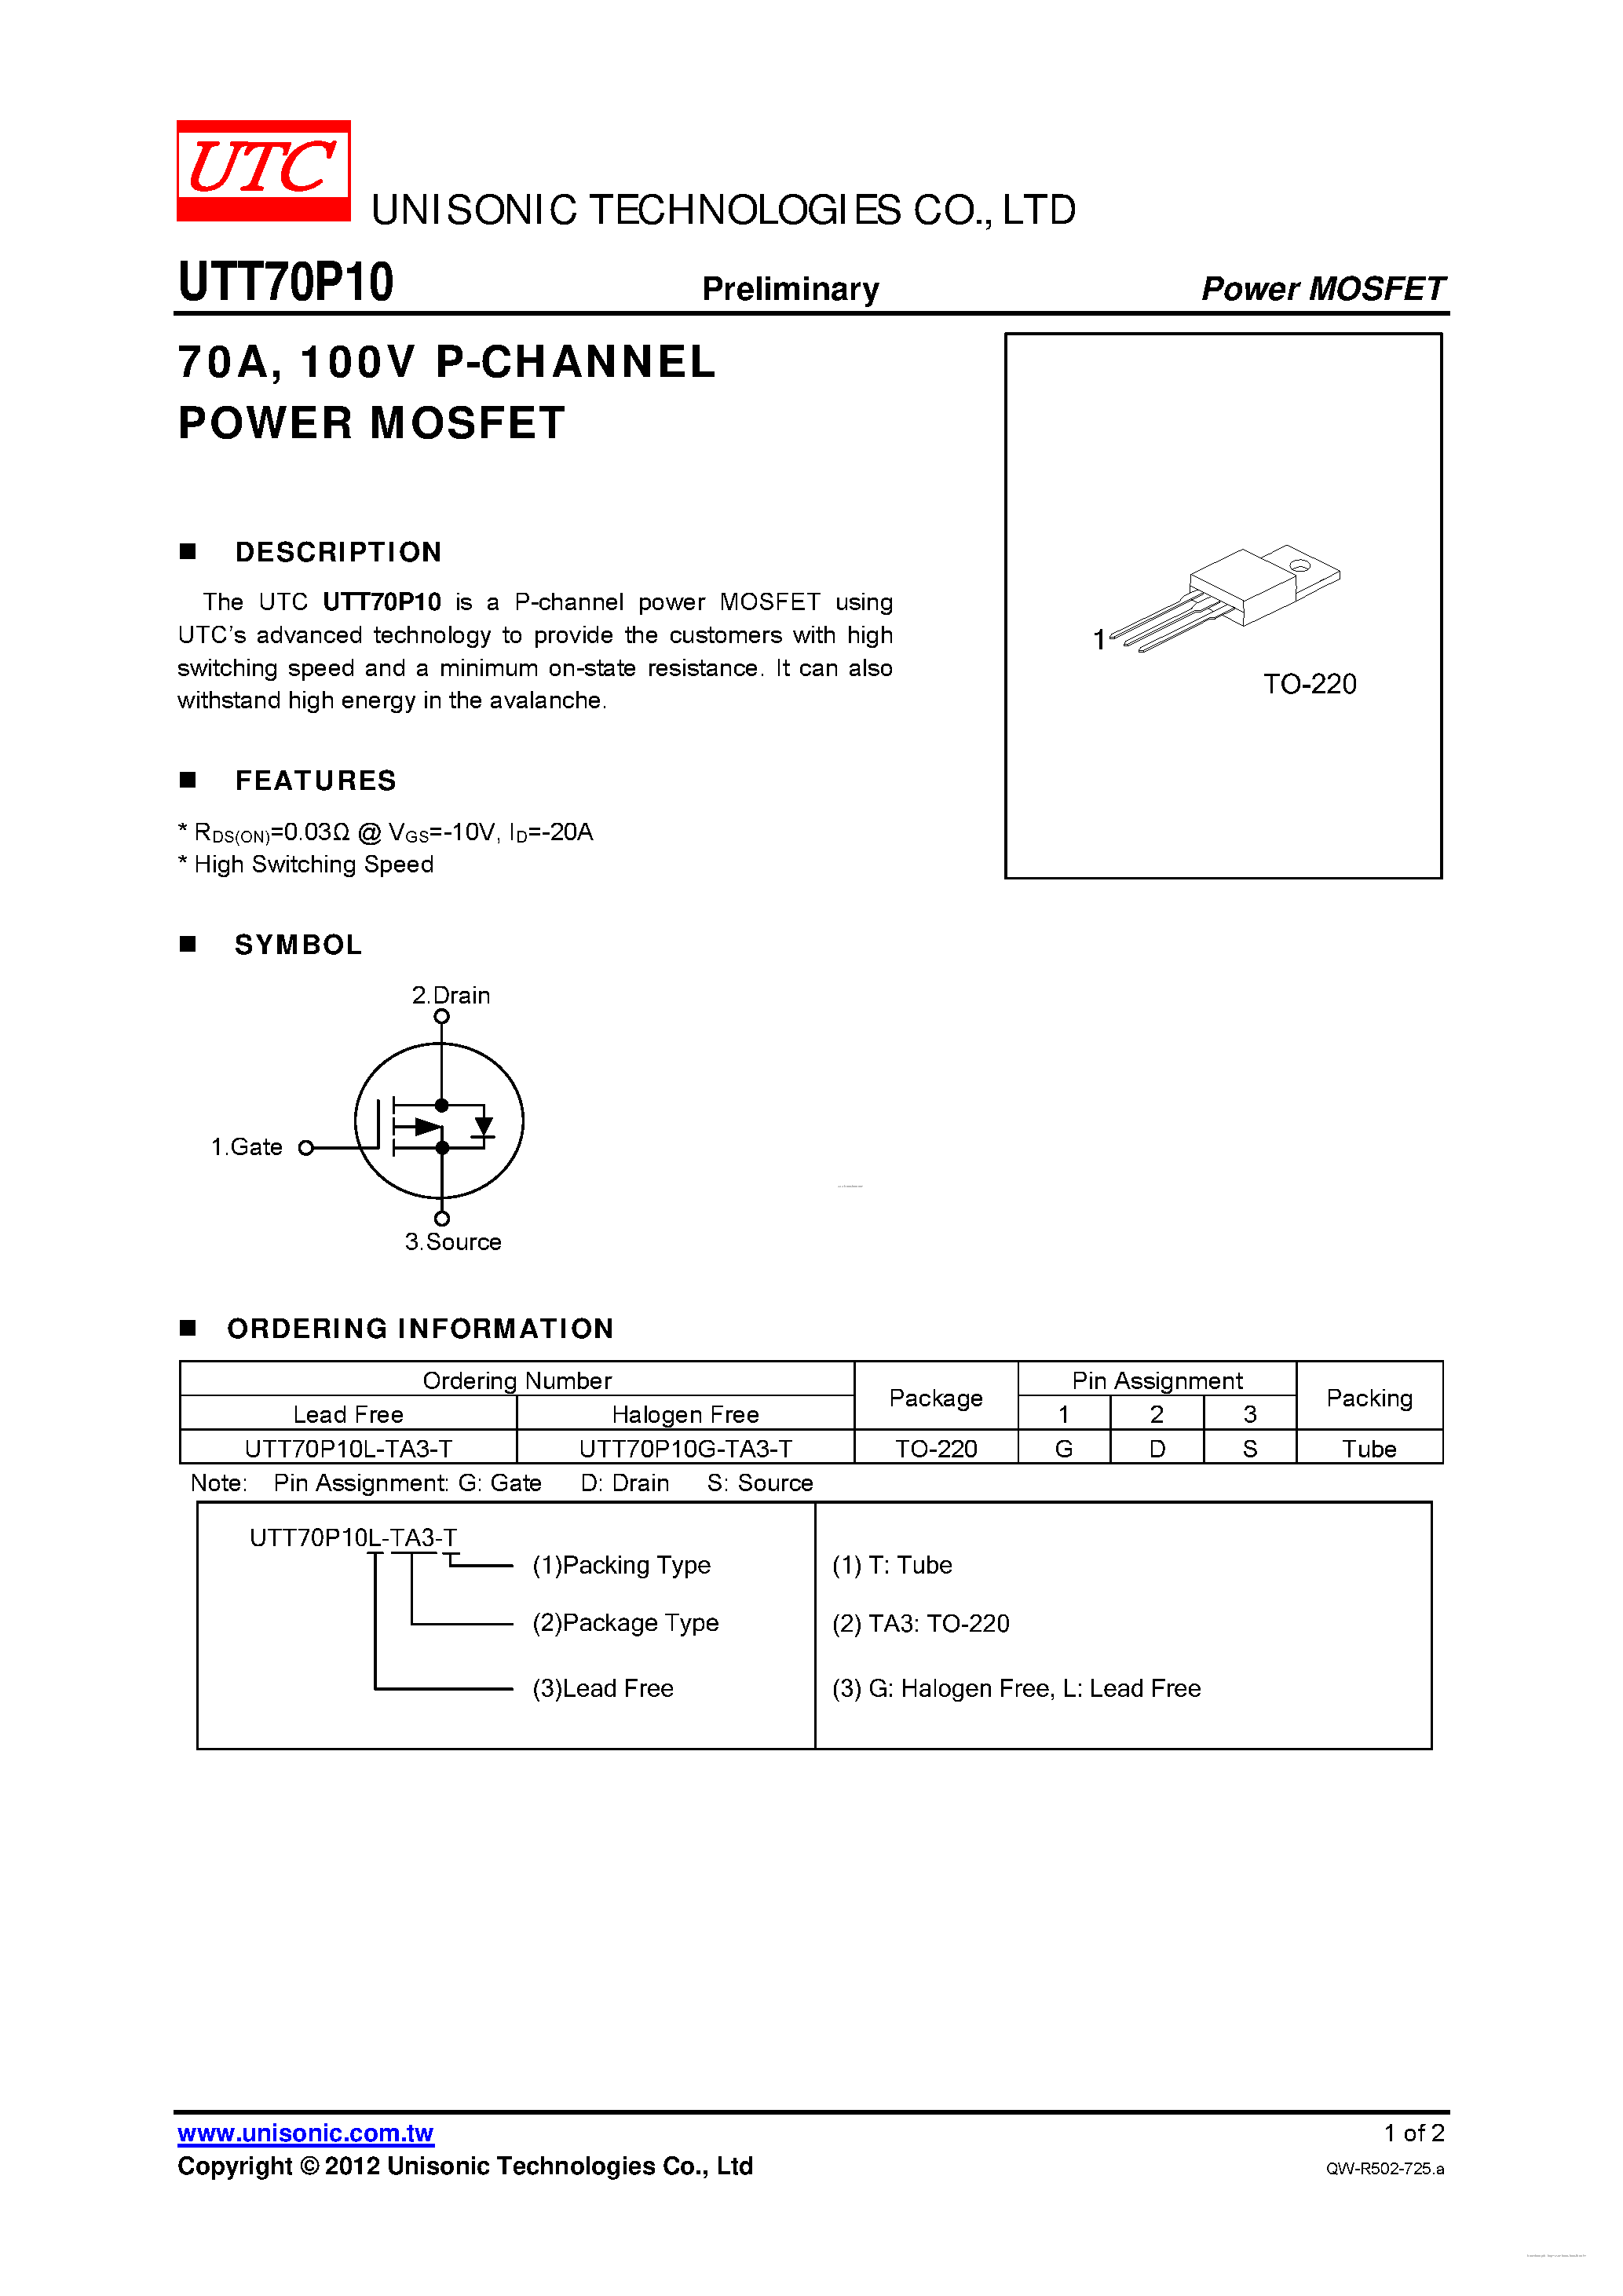 Datasheet UTT70P10 - P-CHANNEL POWER MOSFET page 1